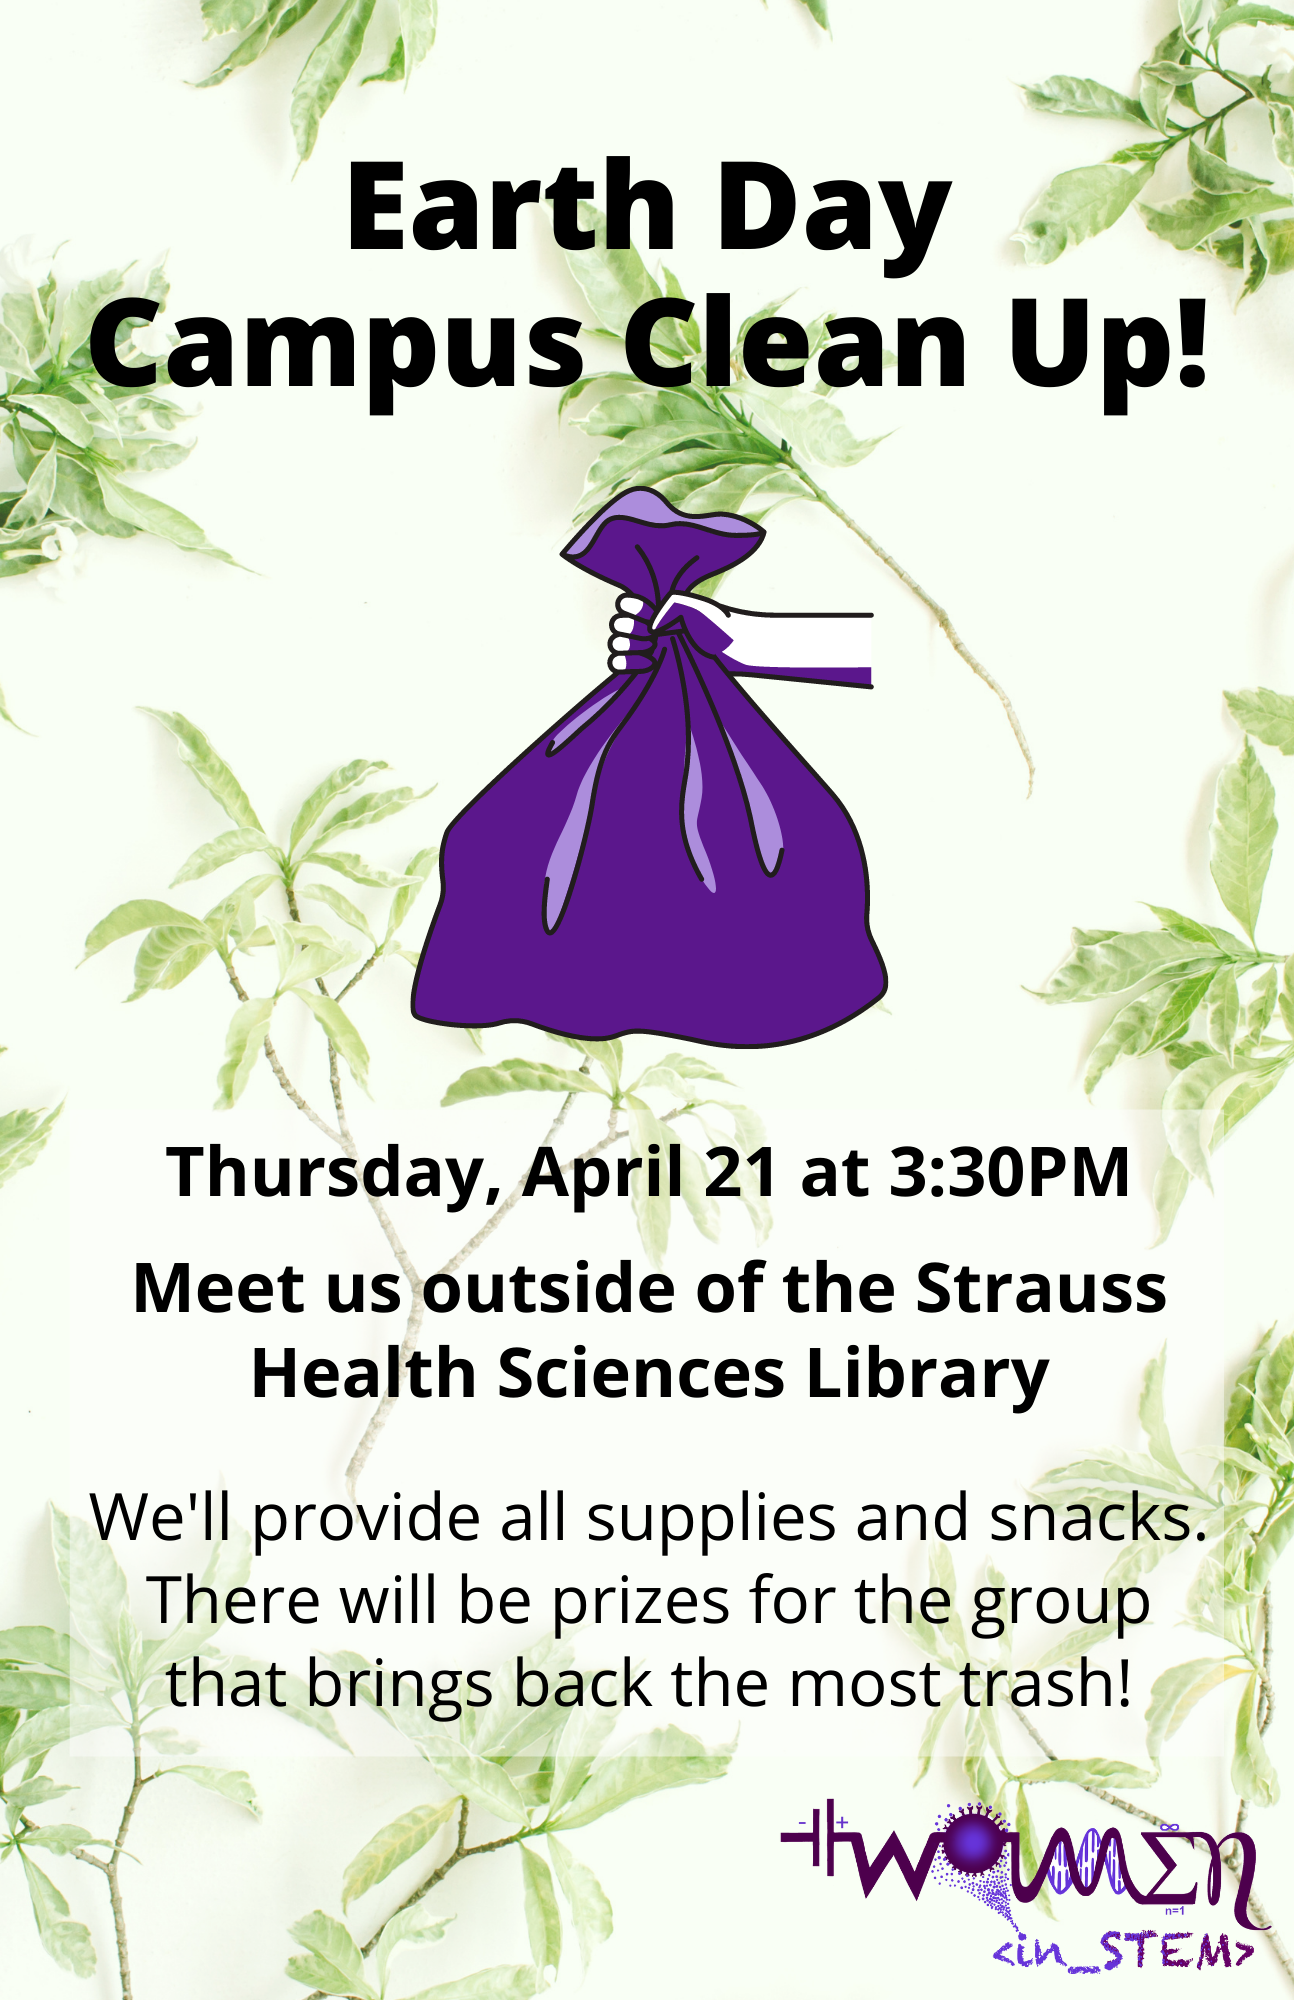 Flyer for Earth Day Campus Clean Up event